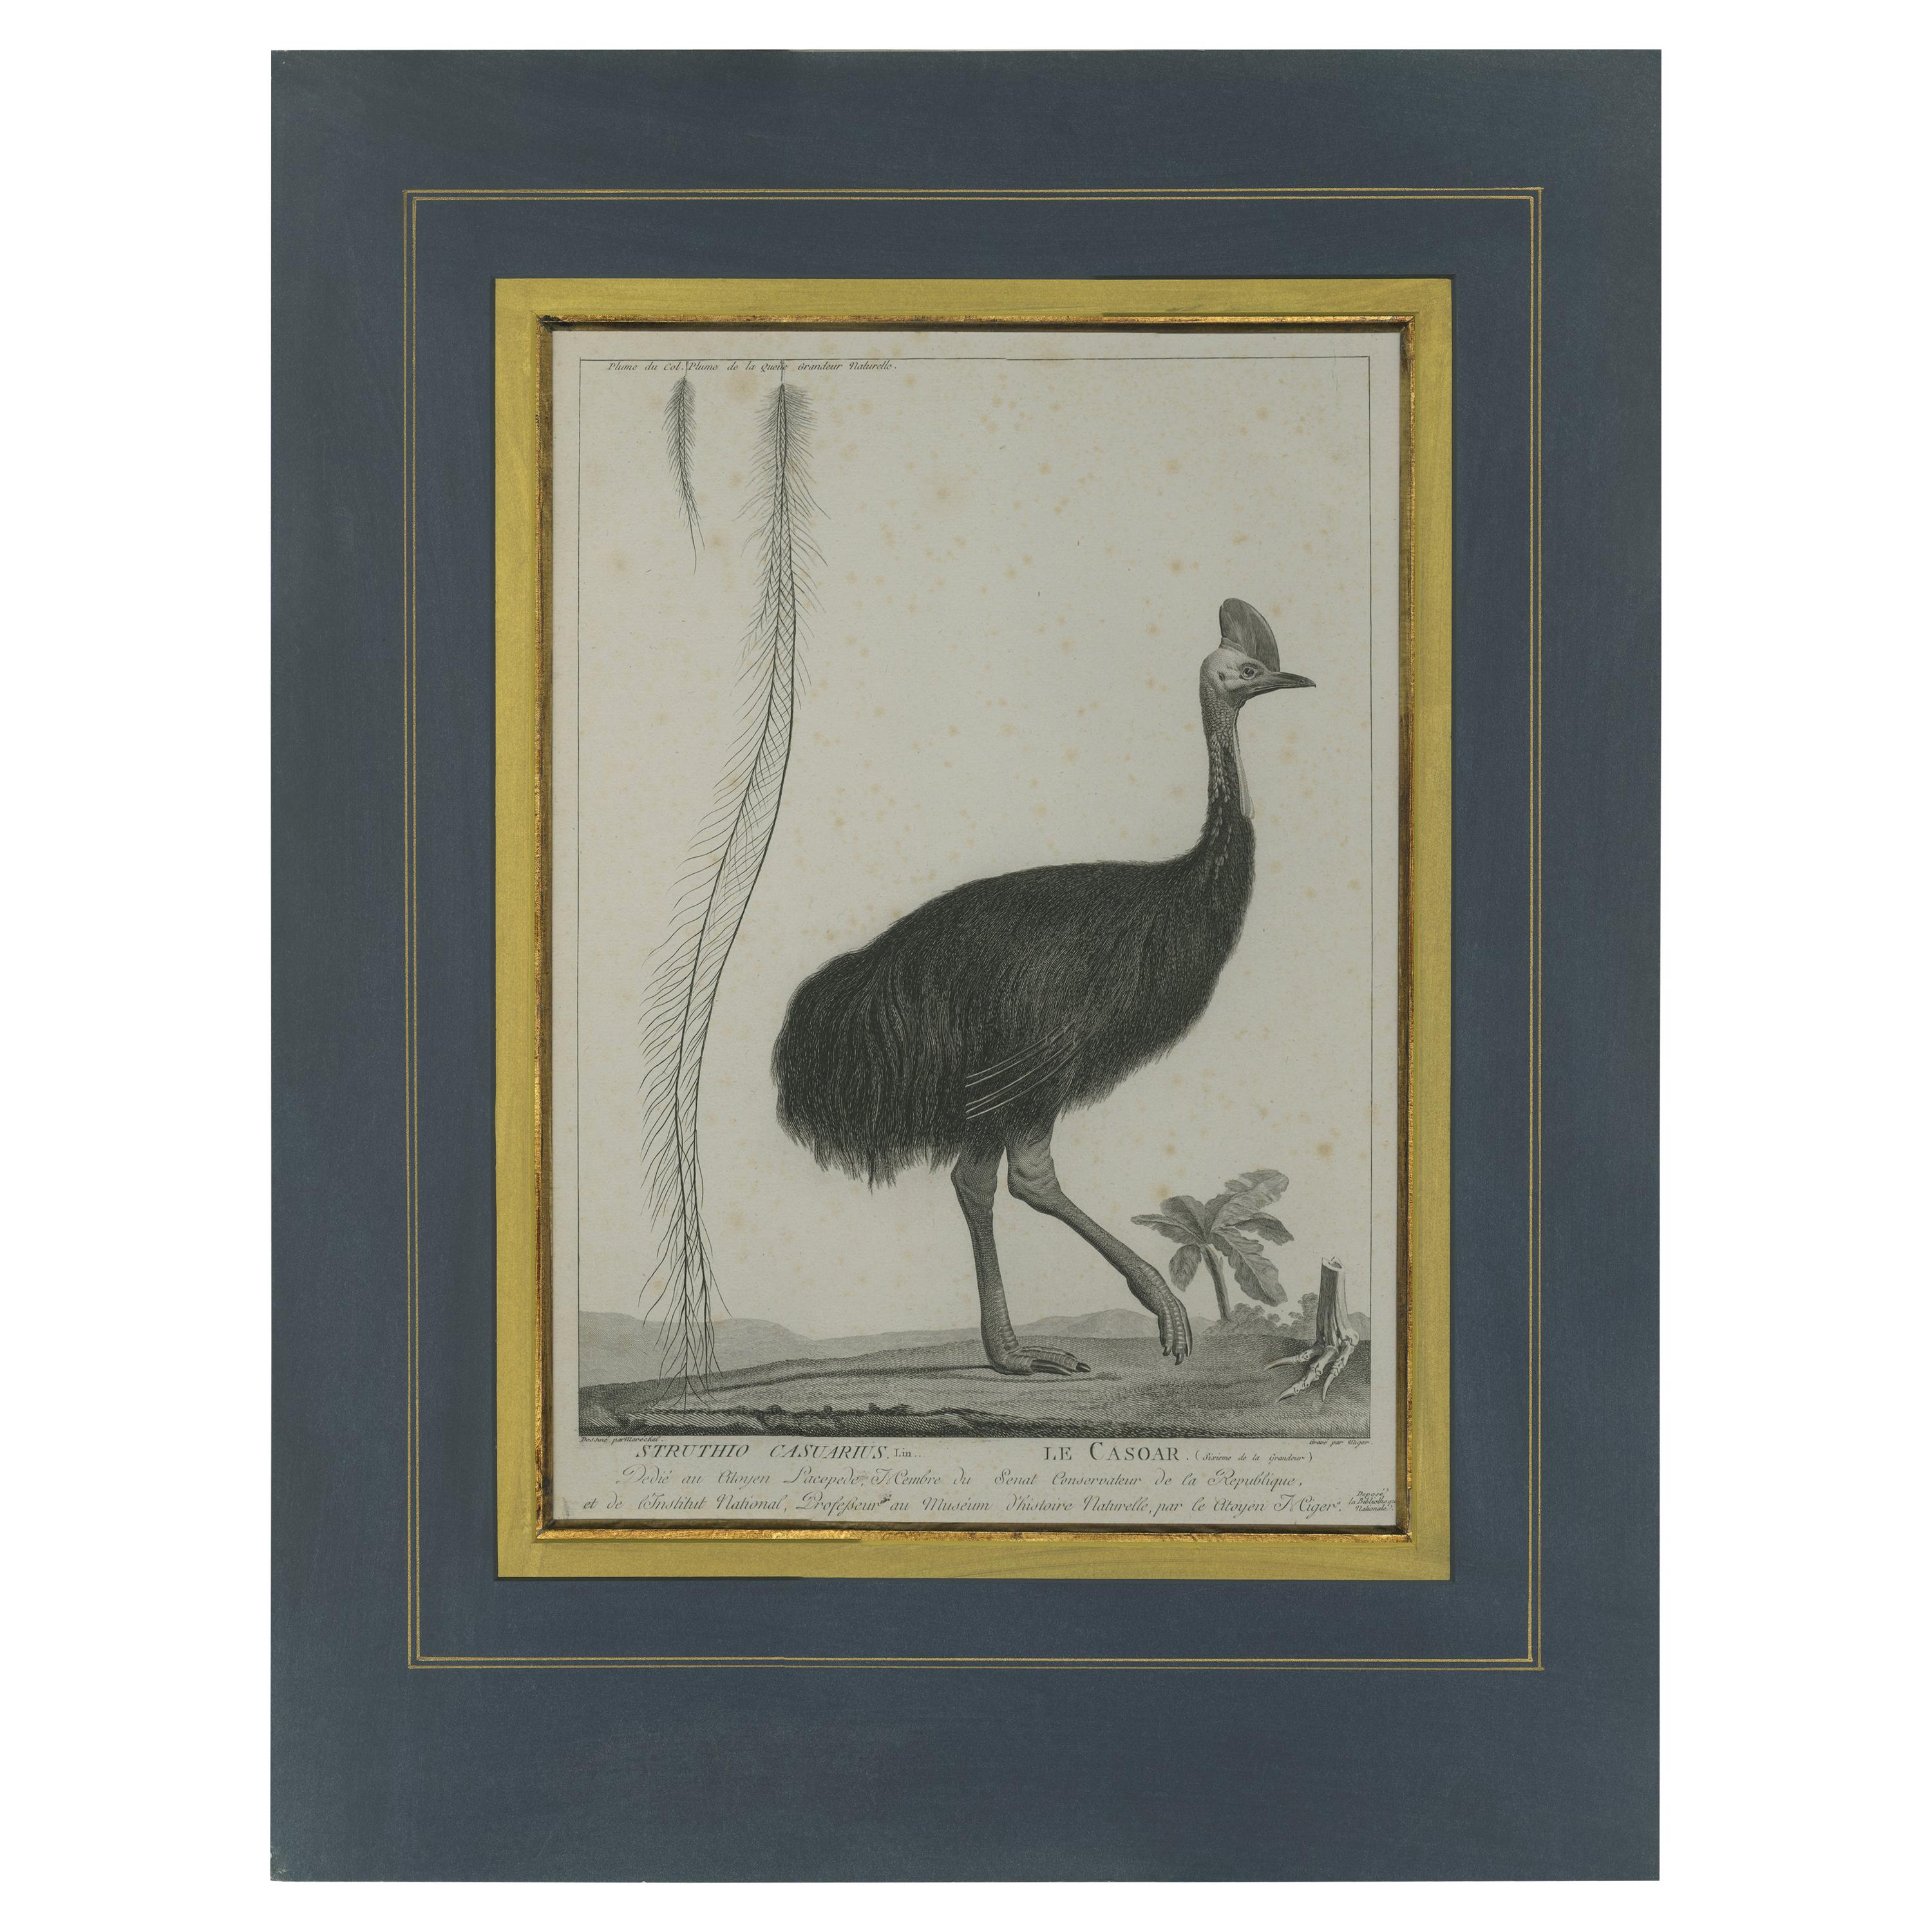 Antique Print of a Cassowary Bird by Miger 'c.1808' For Sale